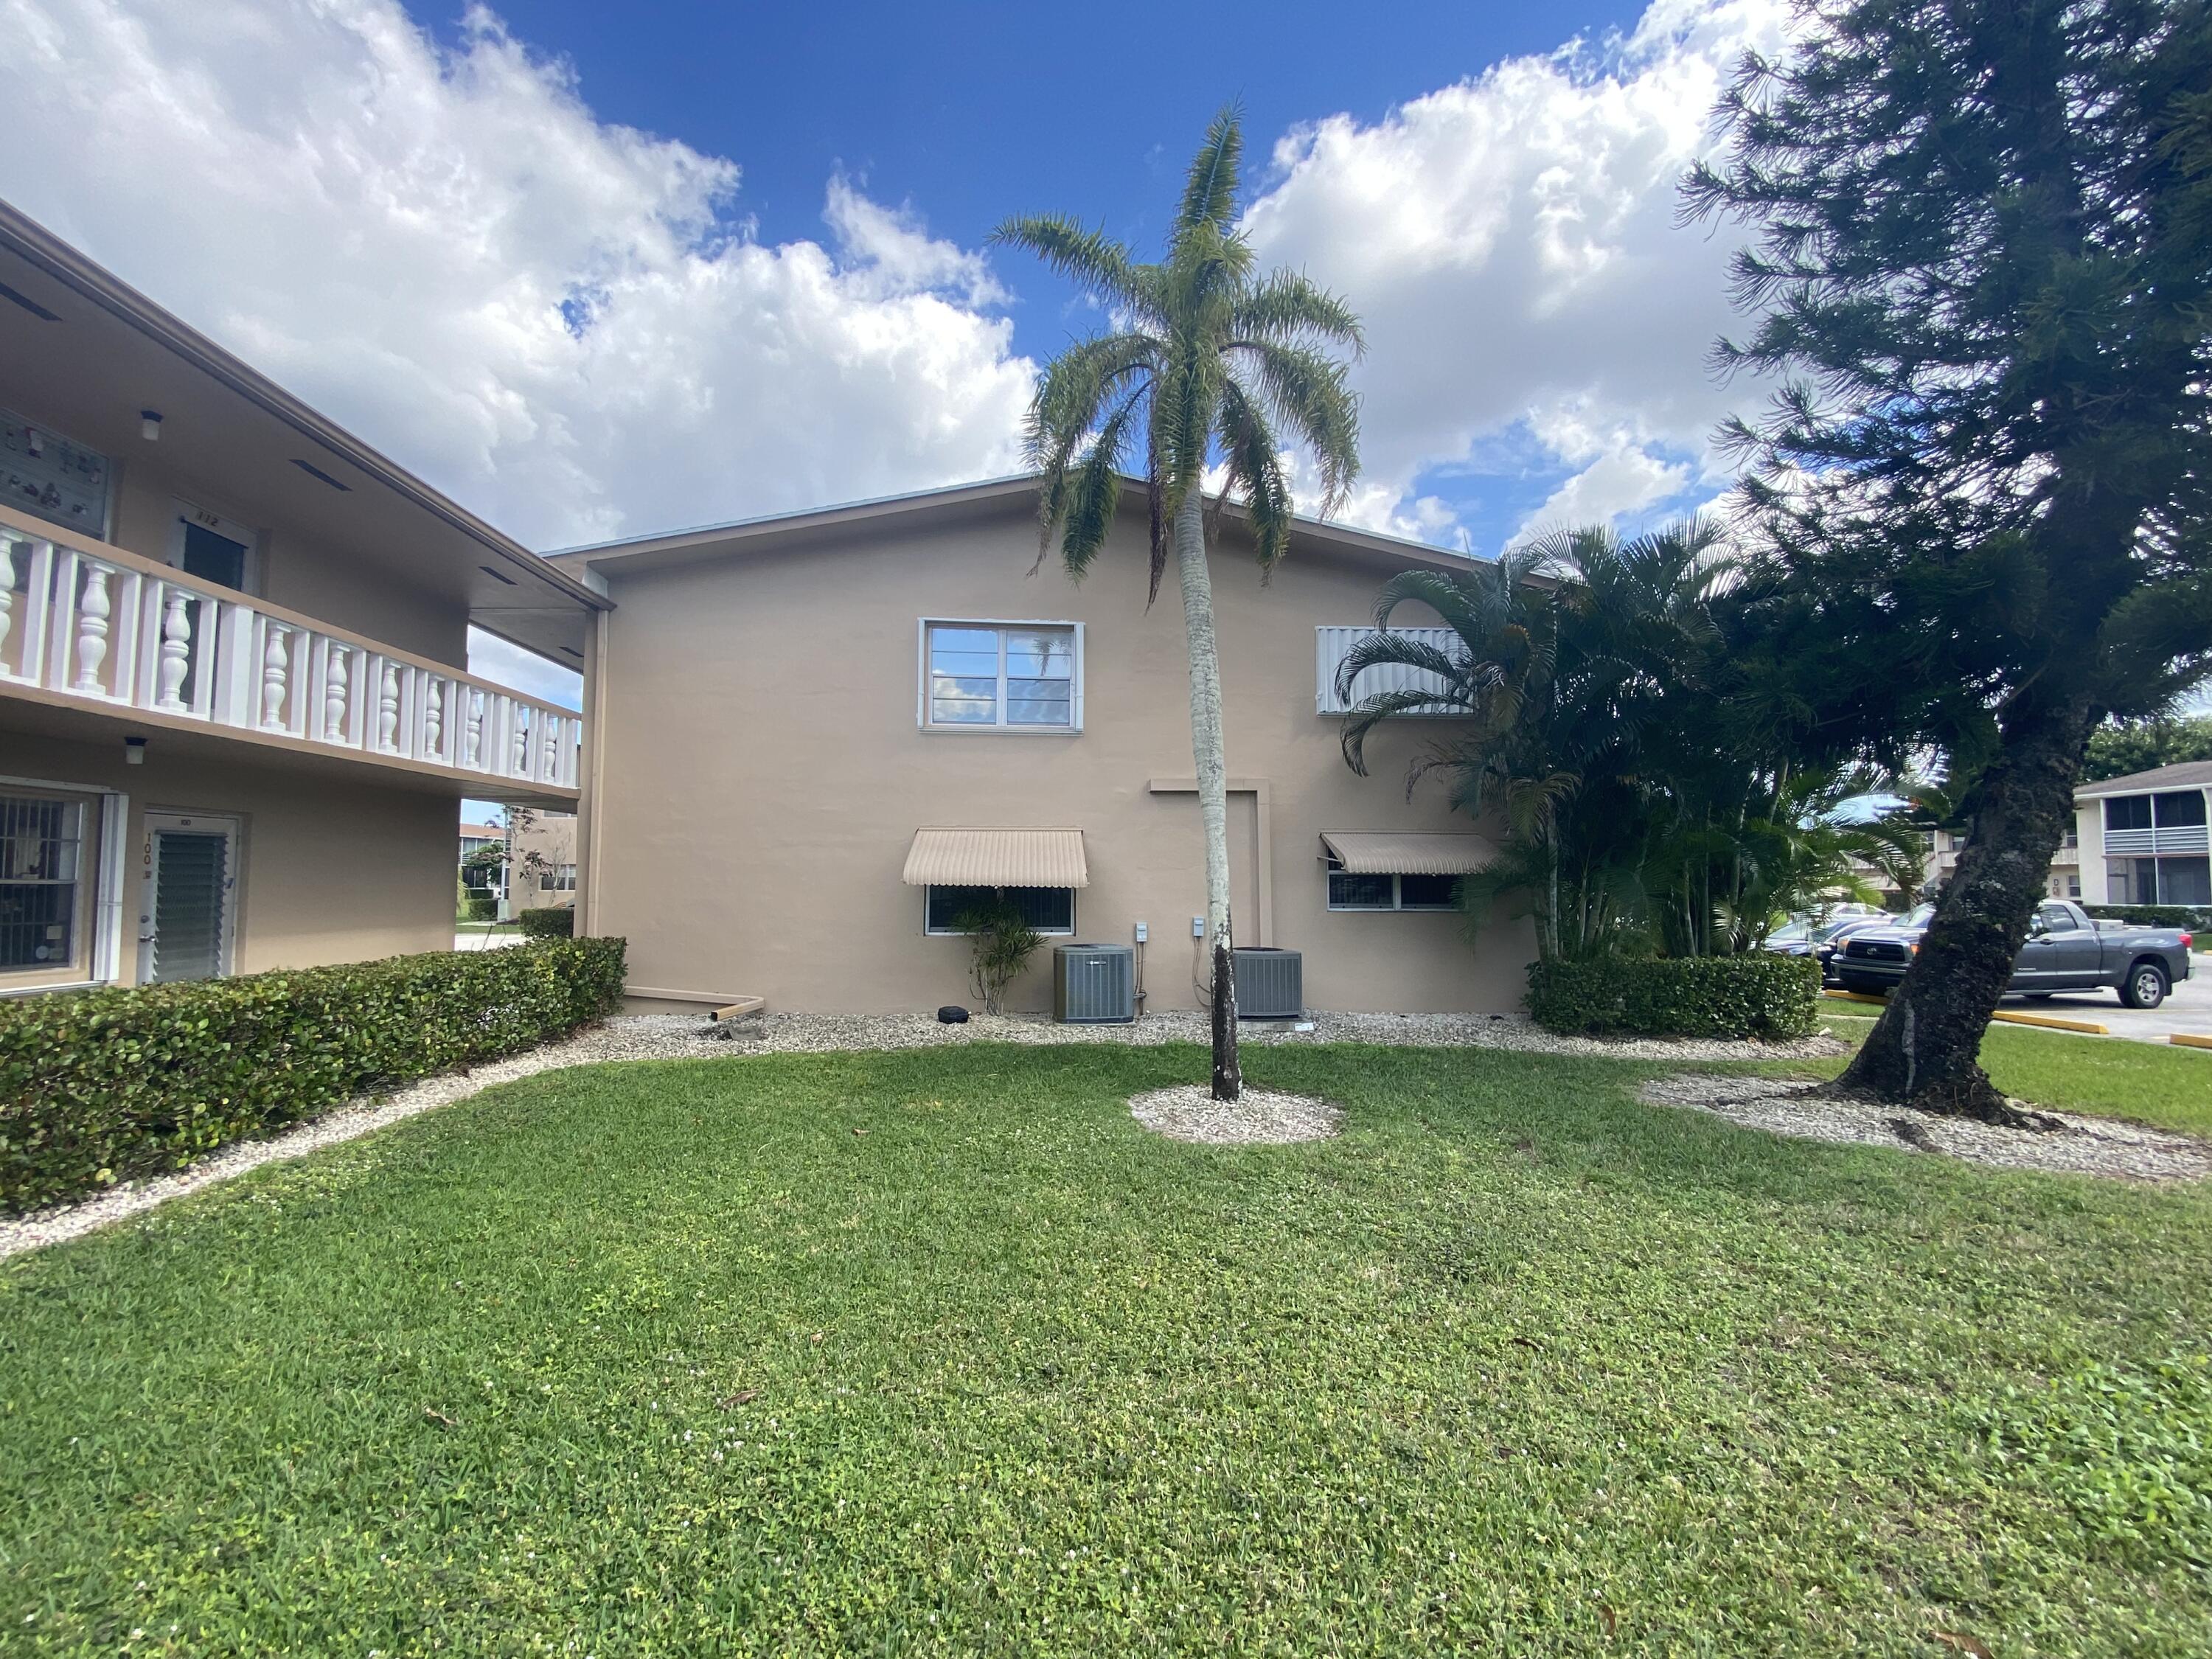 Property for Sale at 113 Norwich E, West Palm Beach, Palm Beach County, Florida - Bedrooms: 1 
Bathrooms: 1.5  - $139,900